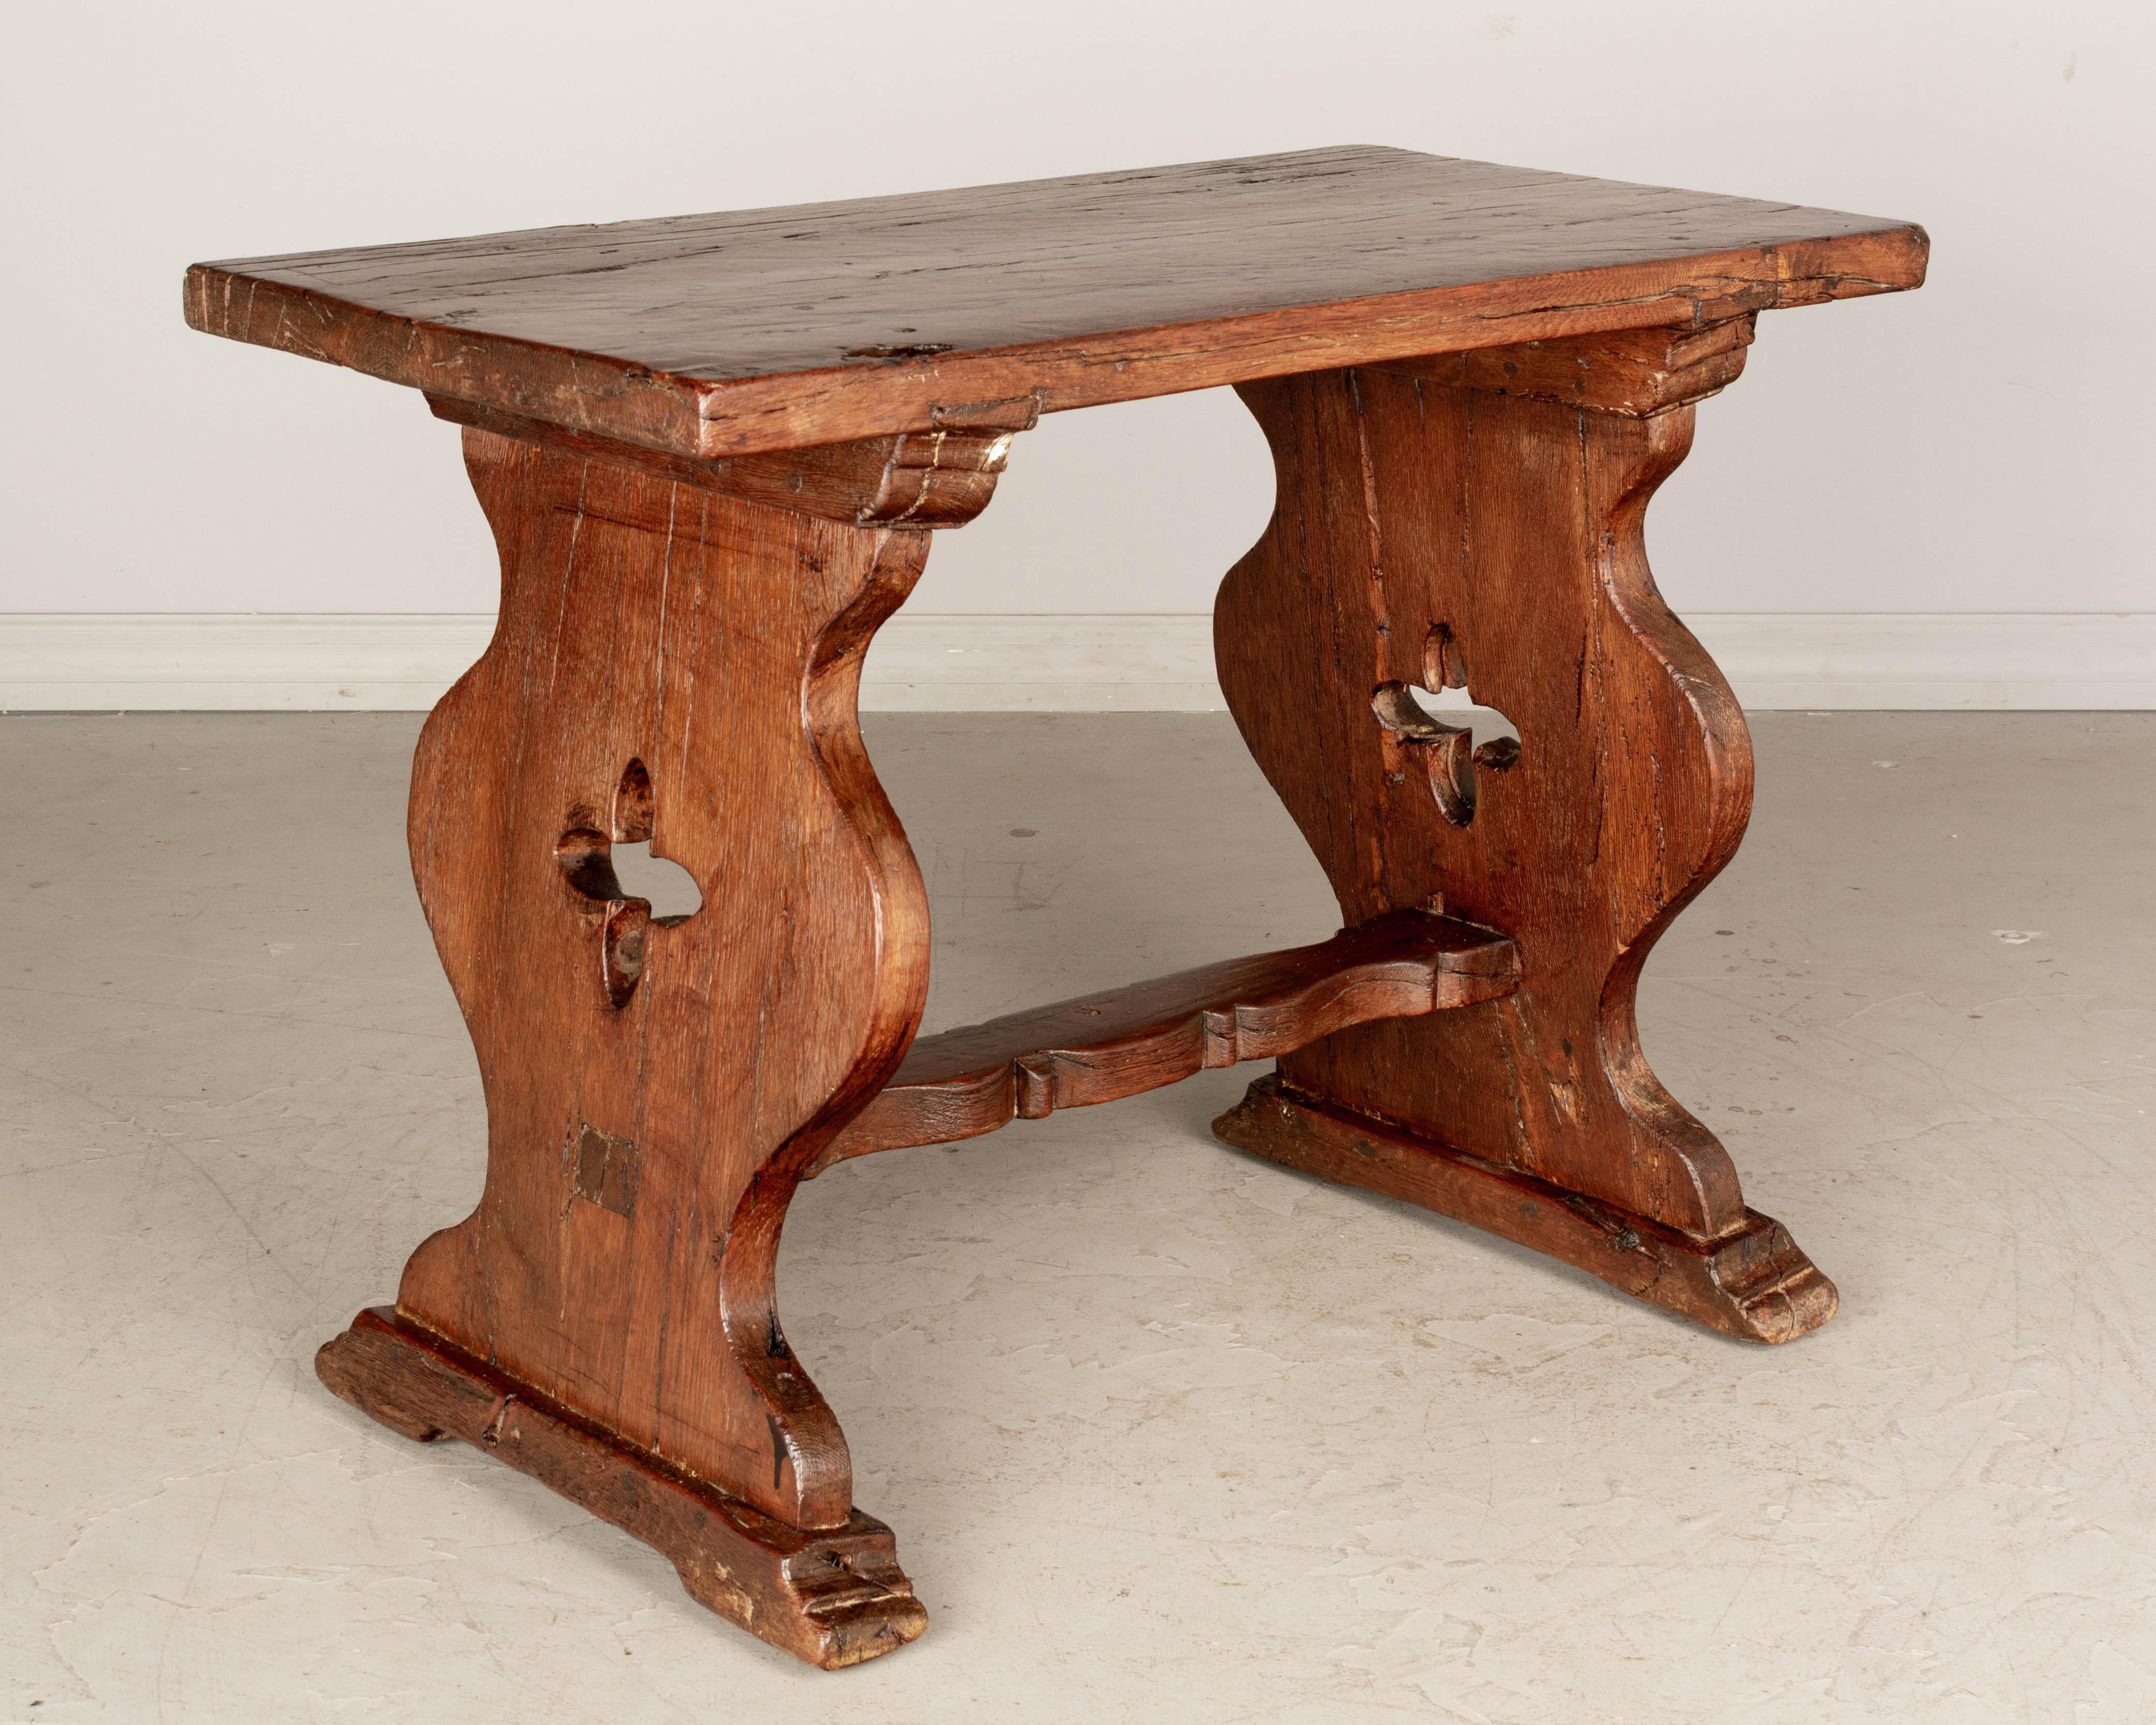 An early 19th century rustic oak side table from Central France. Hand-crafted with quatrefoil shaped cut-outs, thick plank top and shaped stretcher. A good sturdy versatile table. Waxed patina. Contact us for a competitive shipping quotation. Please